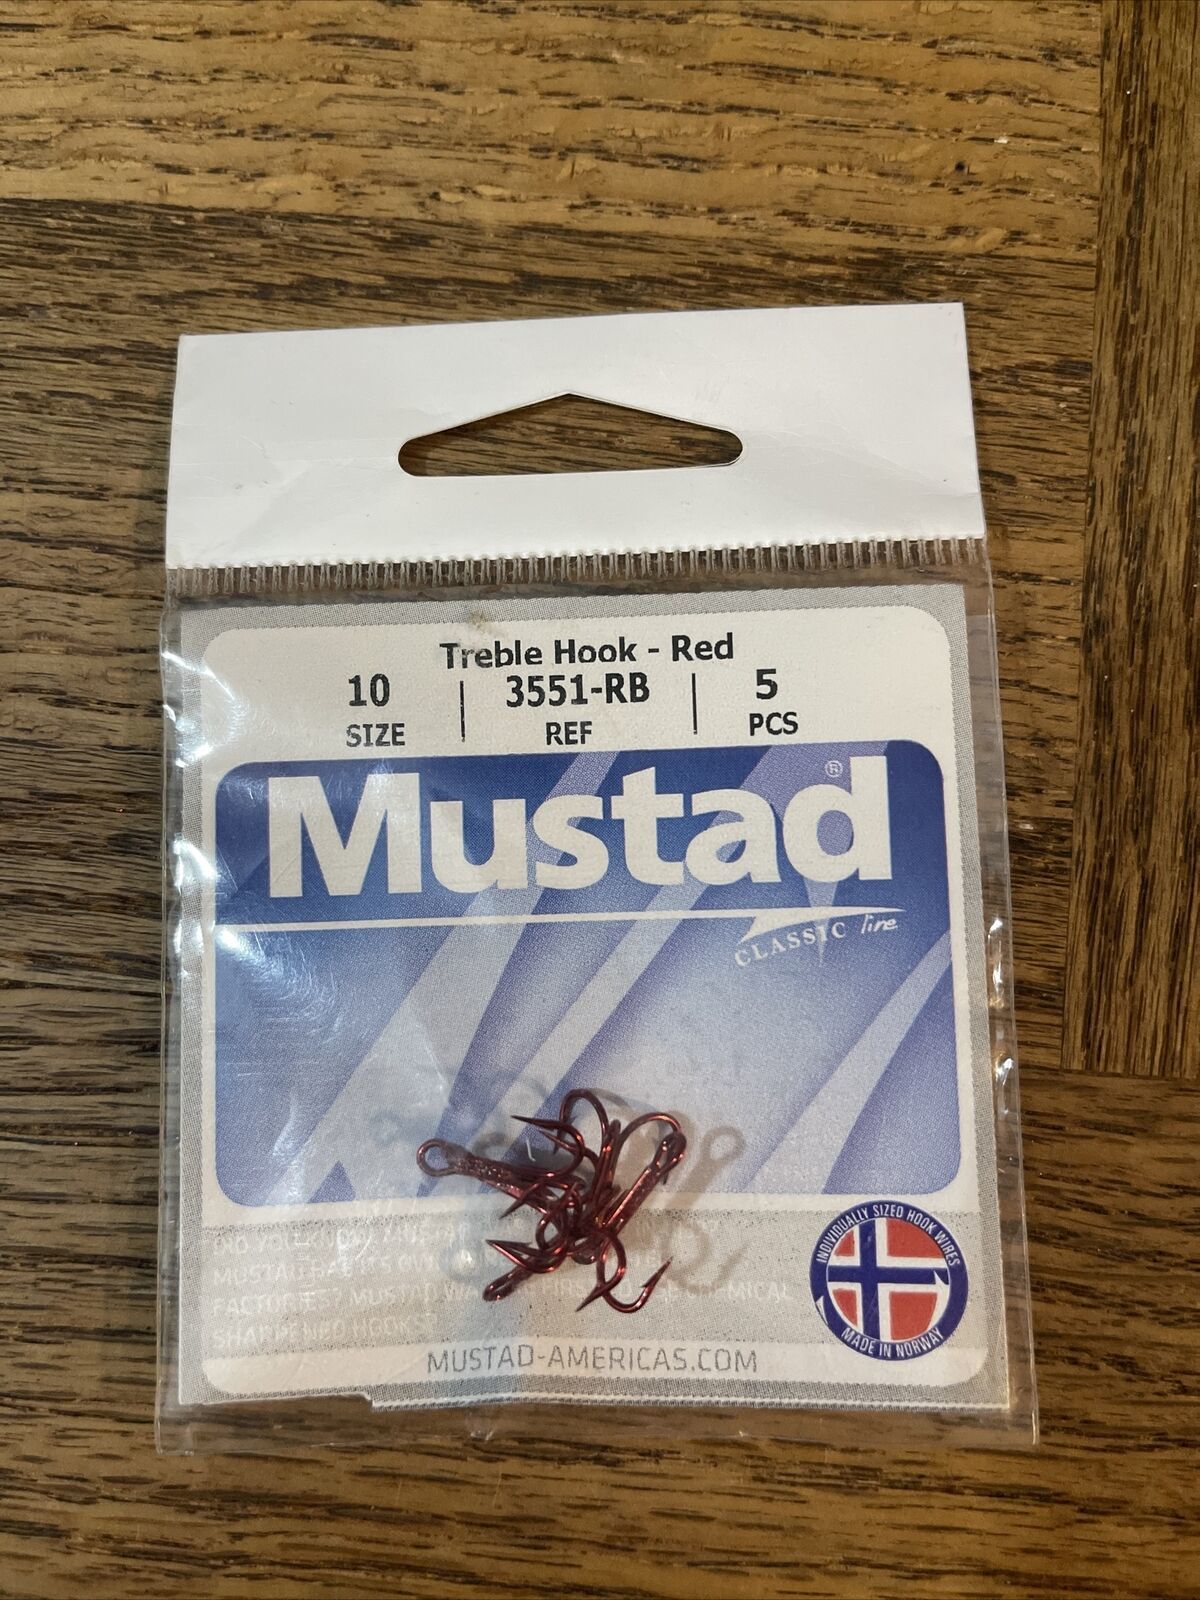 Primary image for Mustad treble hook size 10 red